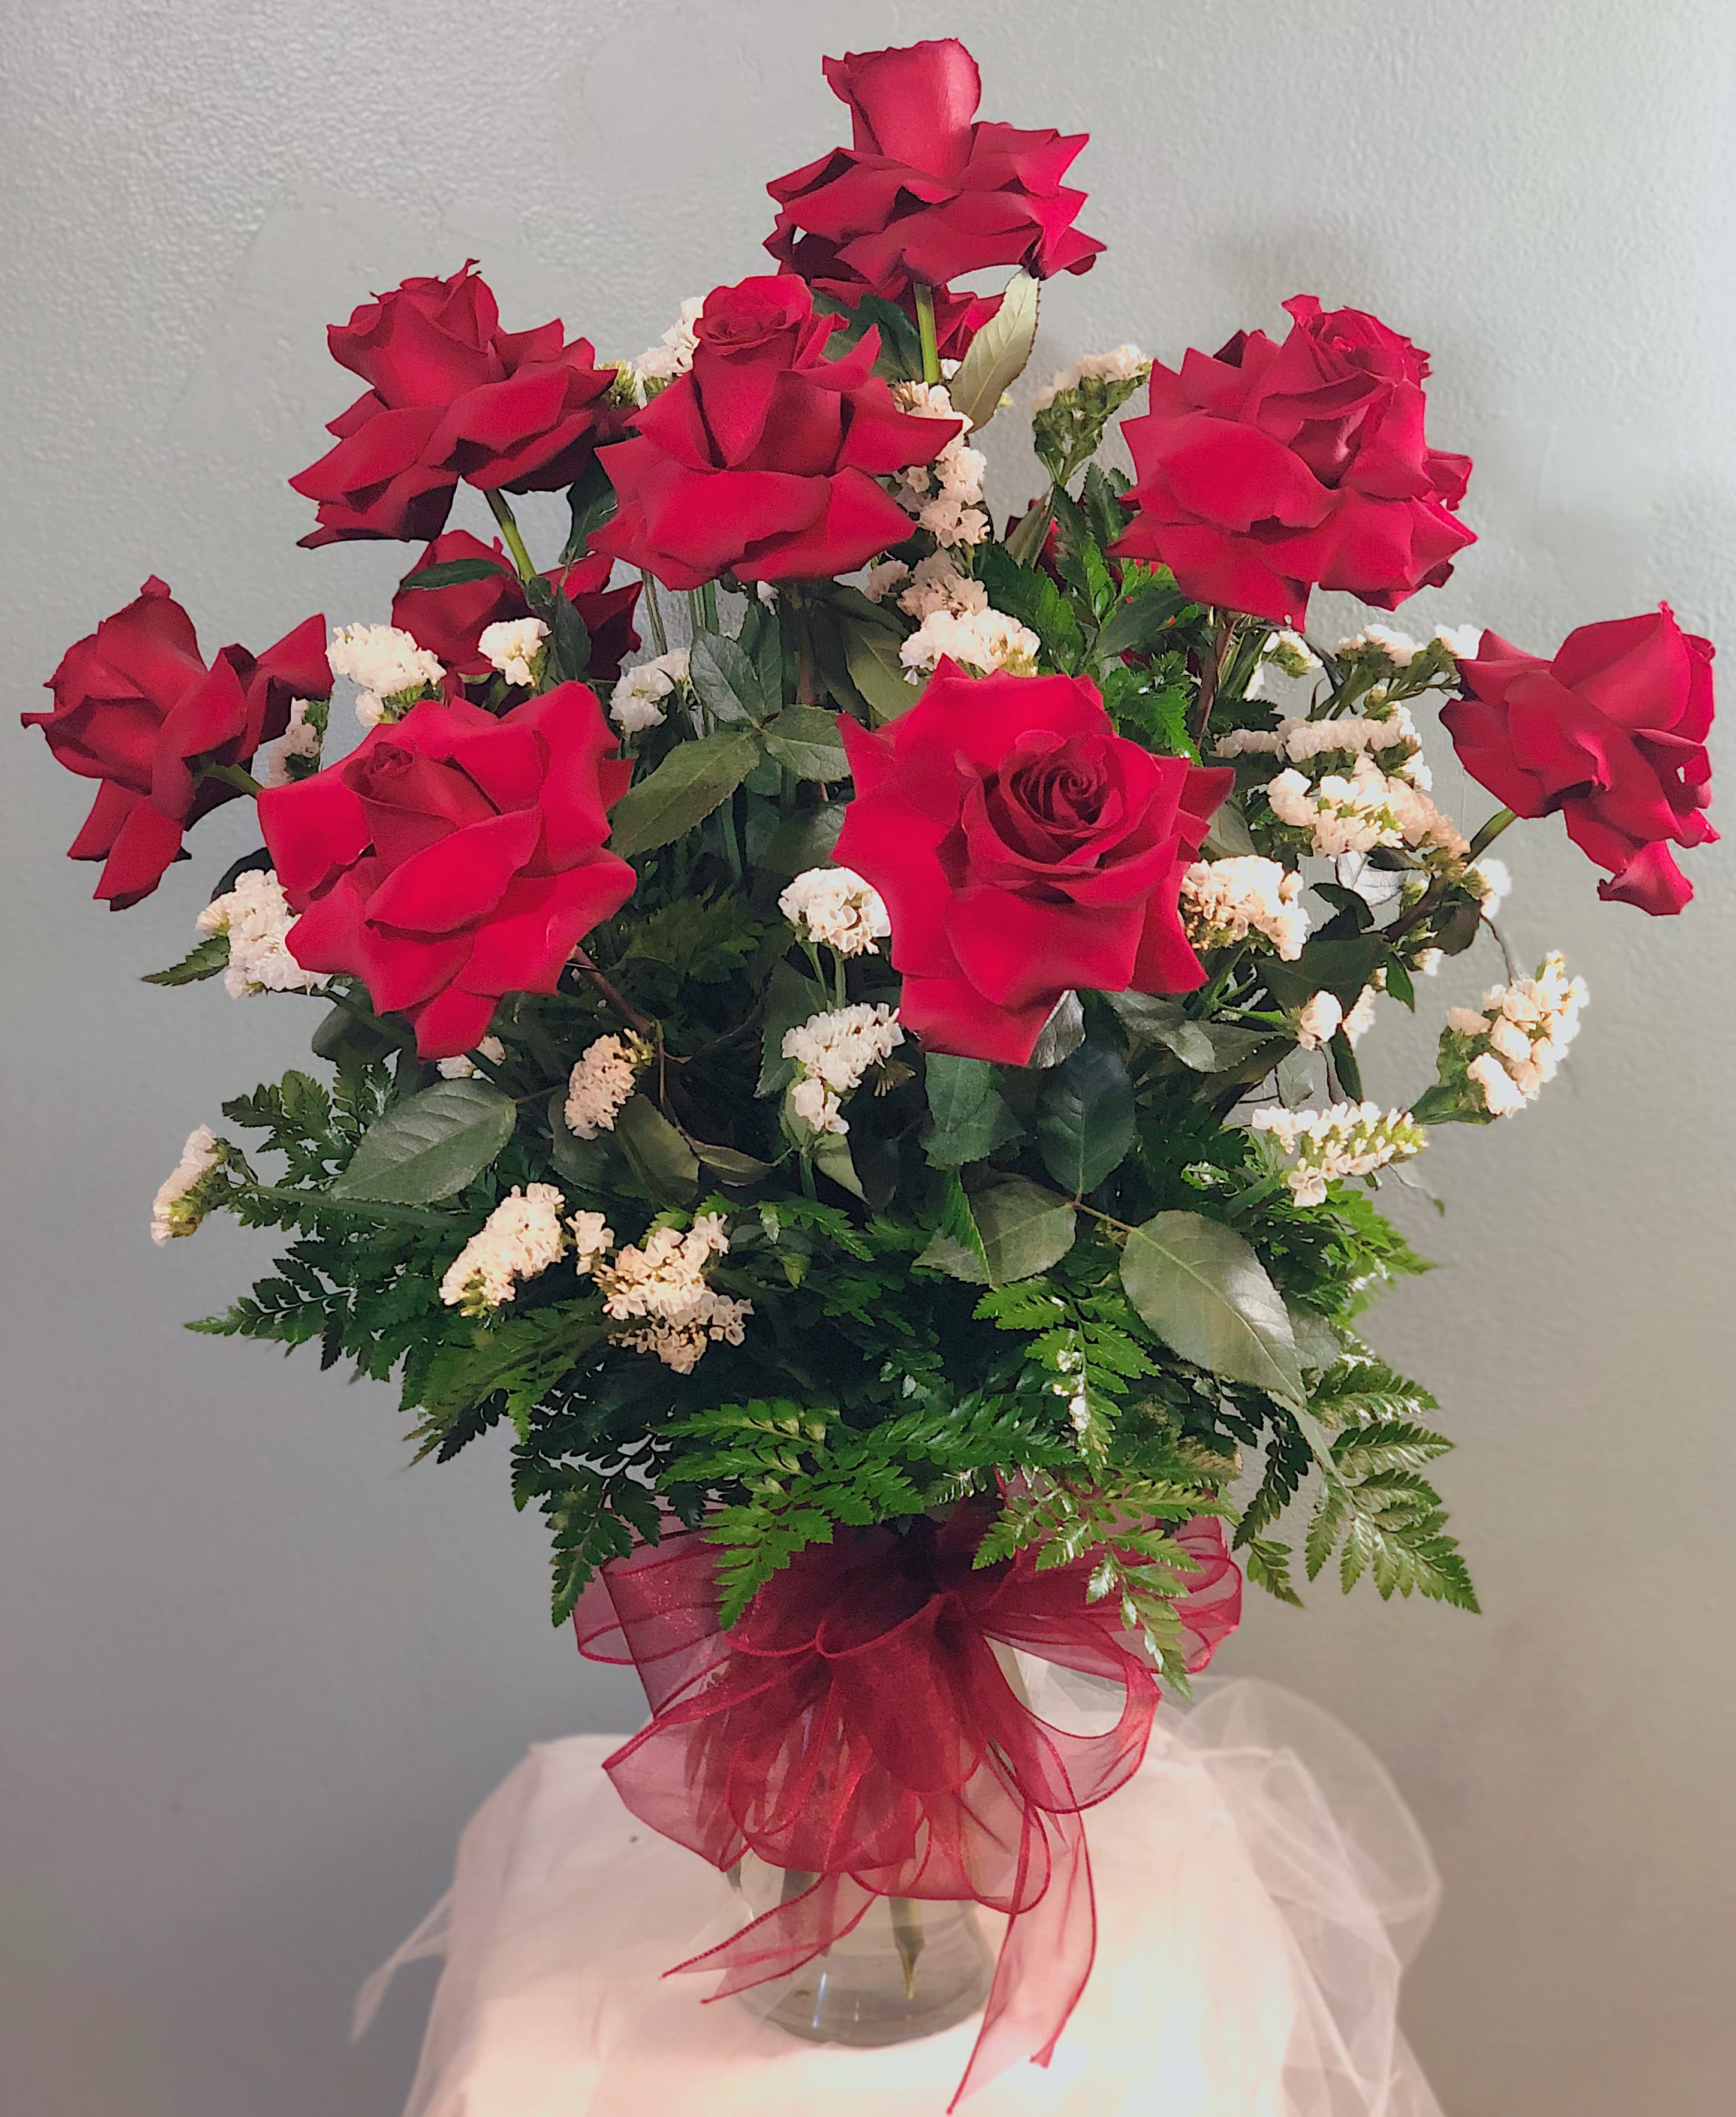 Dozen Red Roses Bella Vase  - A traditional dozen (12) of red roses styled in a Bella vase. Red roses are surrounded by white fill and lush greens to highlight the beauty of the rose. A large sheer ribbon bow is added for the final touches! Perfect for any occasion!  